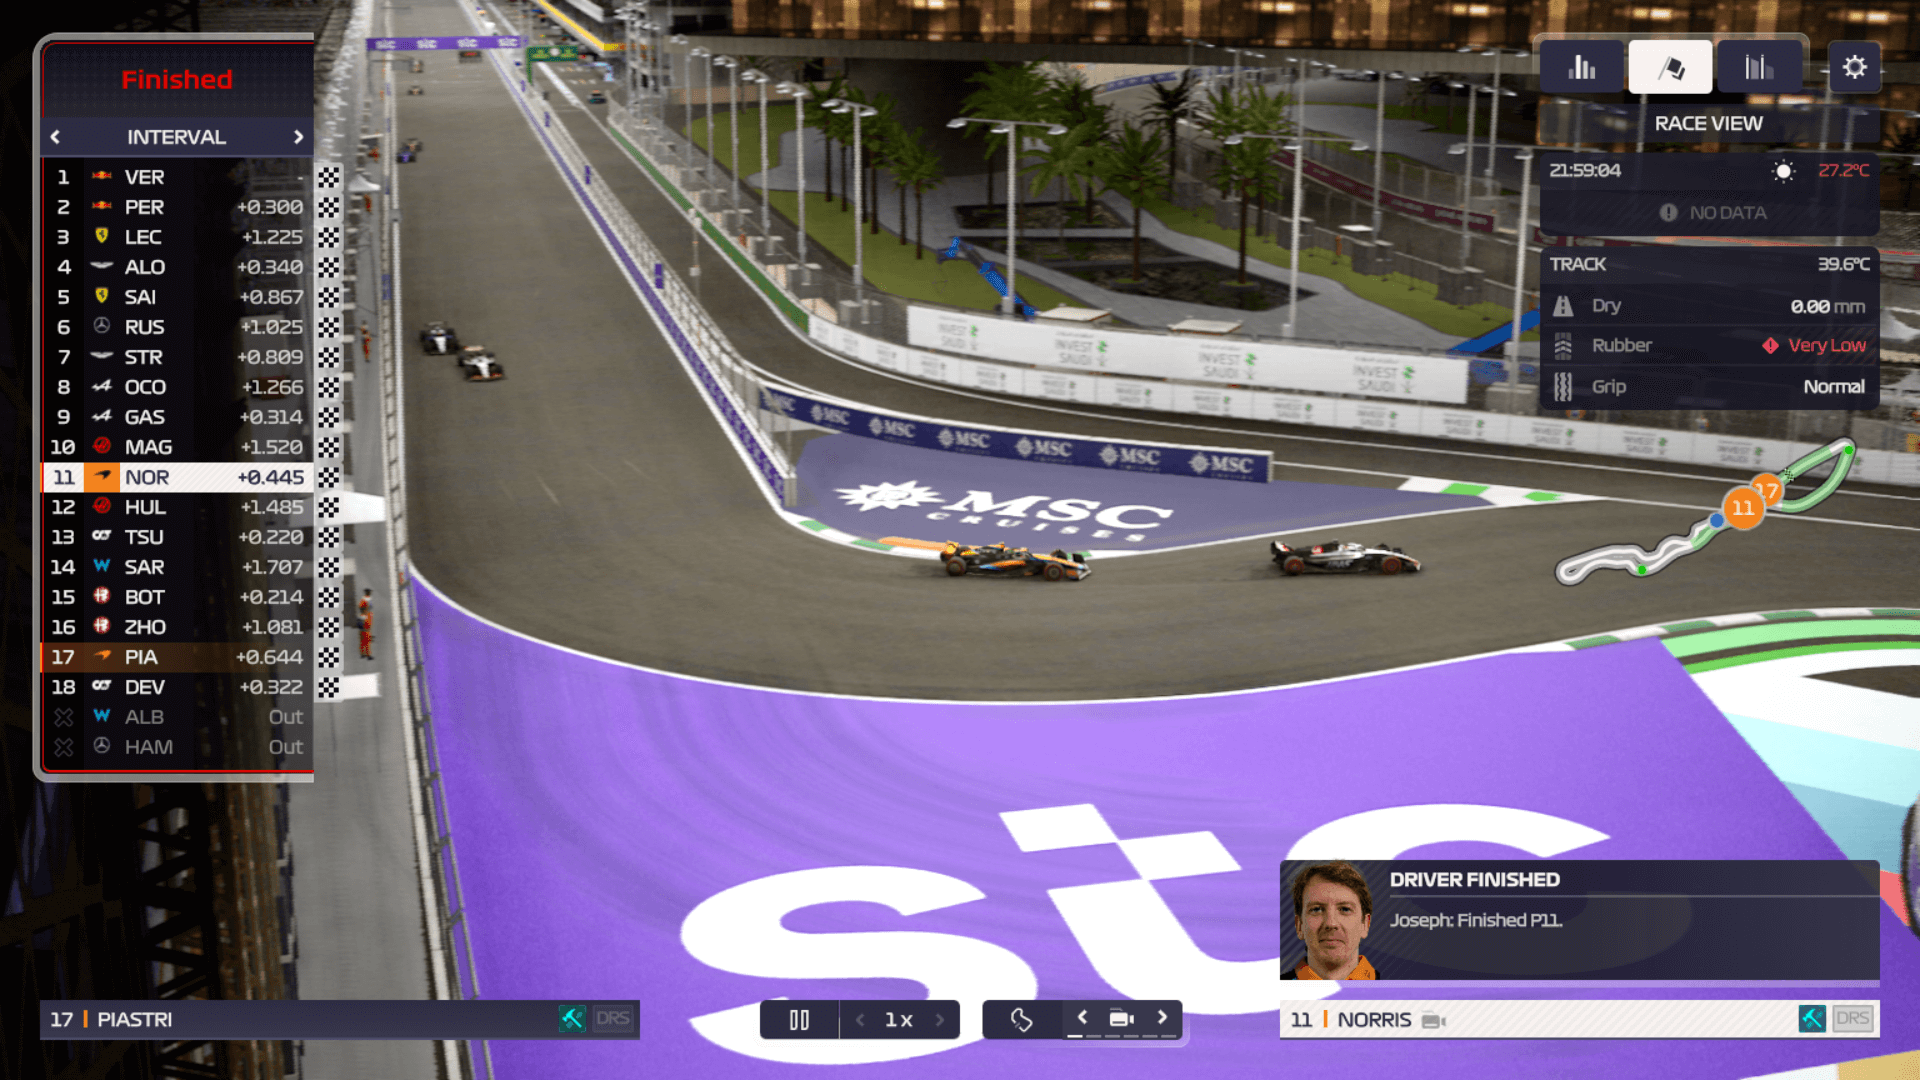 A screenshot taken from the second race of the season, showing two F1 cars and the standings to the left of the photograph. 